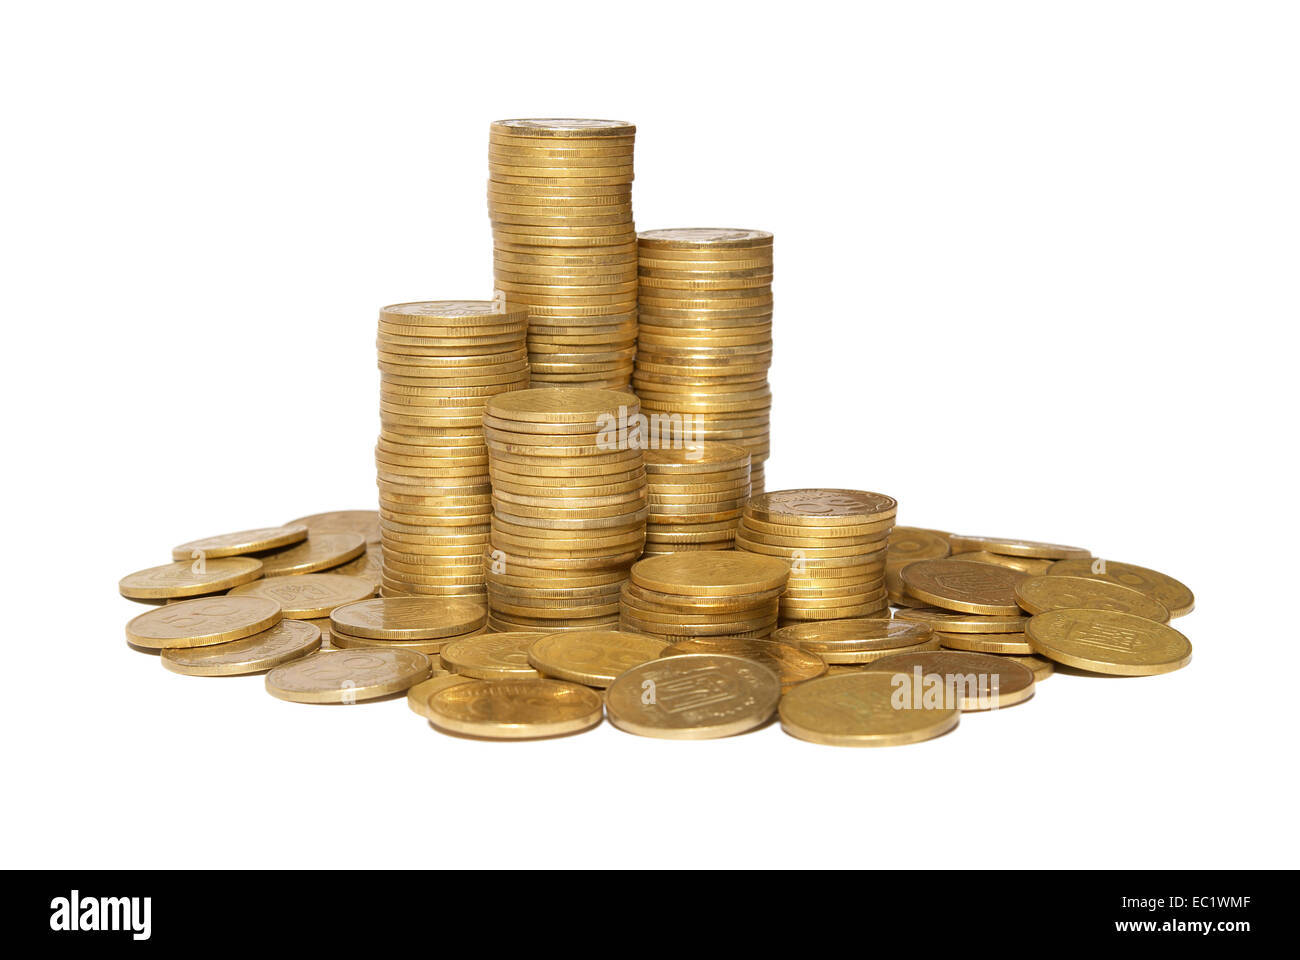 Column of golden coins isolated on white. Stock Photo